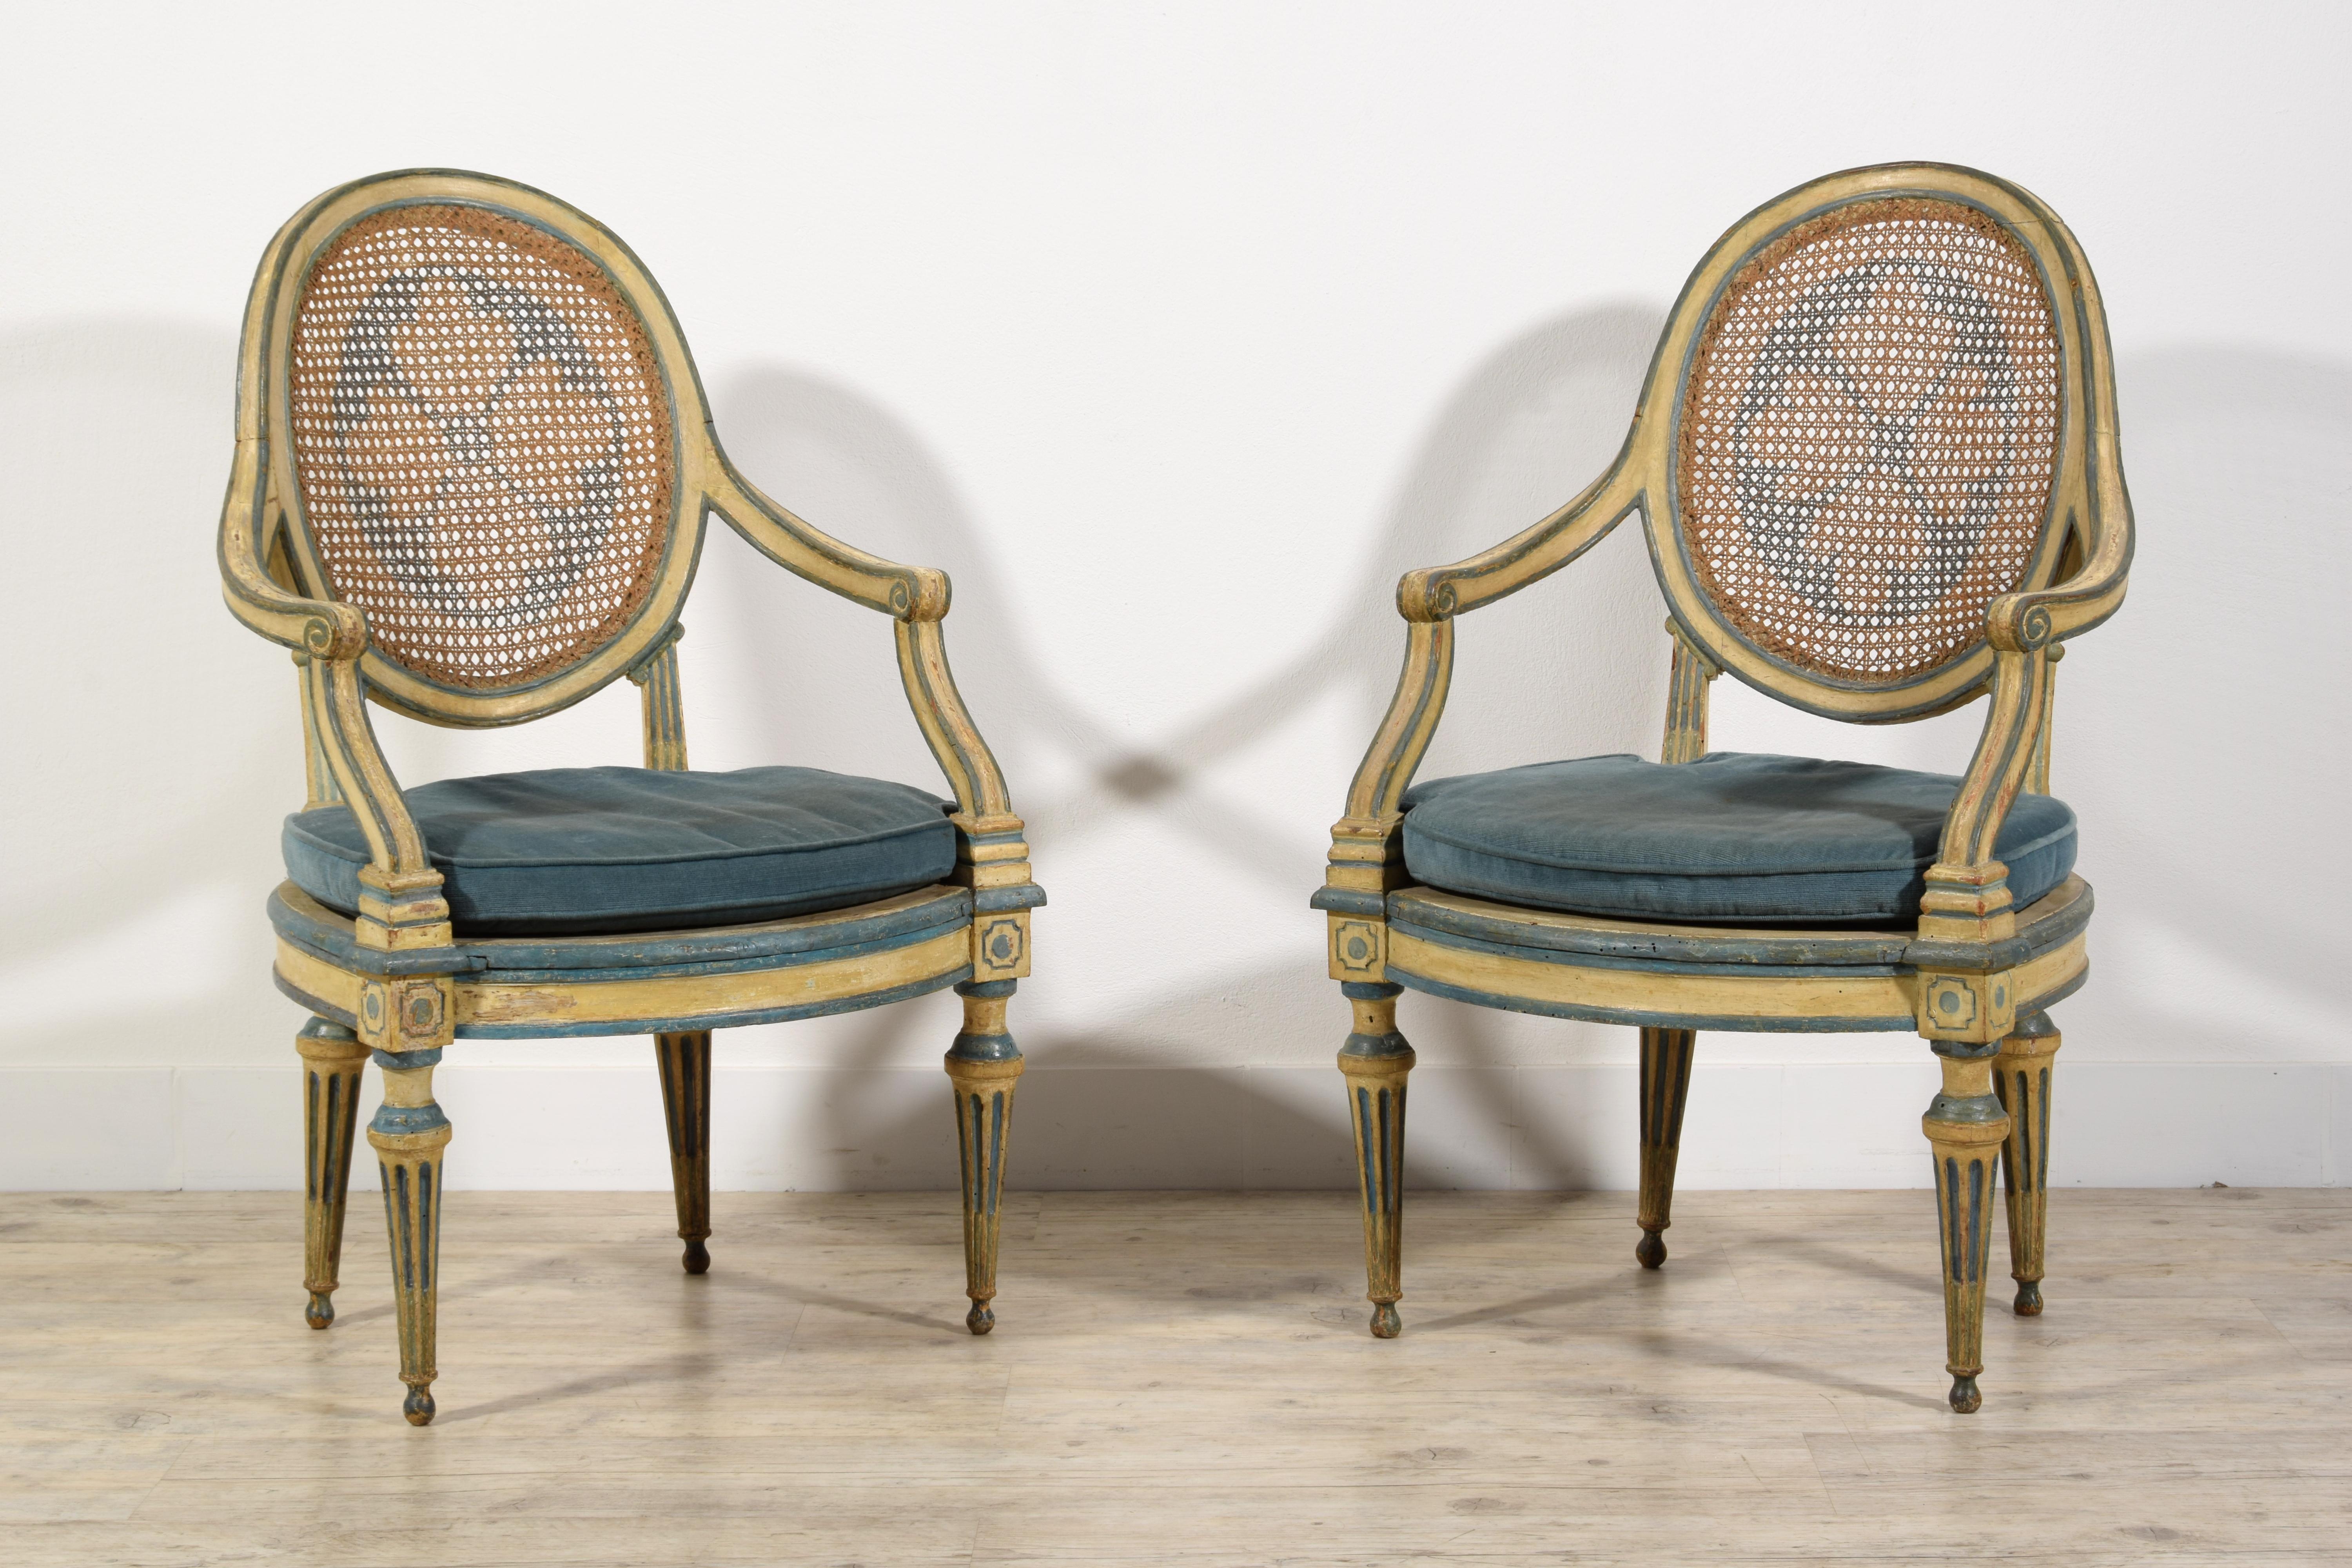 18th Century pair of Italian Neoclassical Lacquered wood armchairs. 
Measurements: cm H 108 x W 73 x D 77, seat cm H 46 x D 51 x W 61.
This elegant pair of neoclassical armchairs was made in Genoa, Italy, towards the end of the 18th century. The